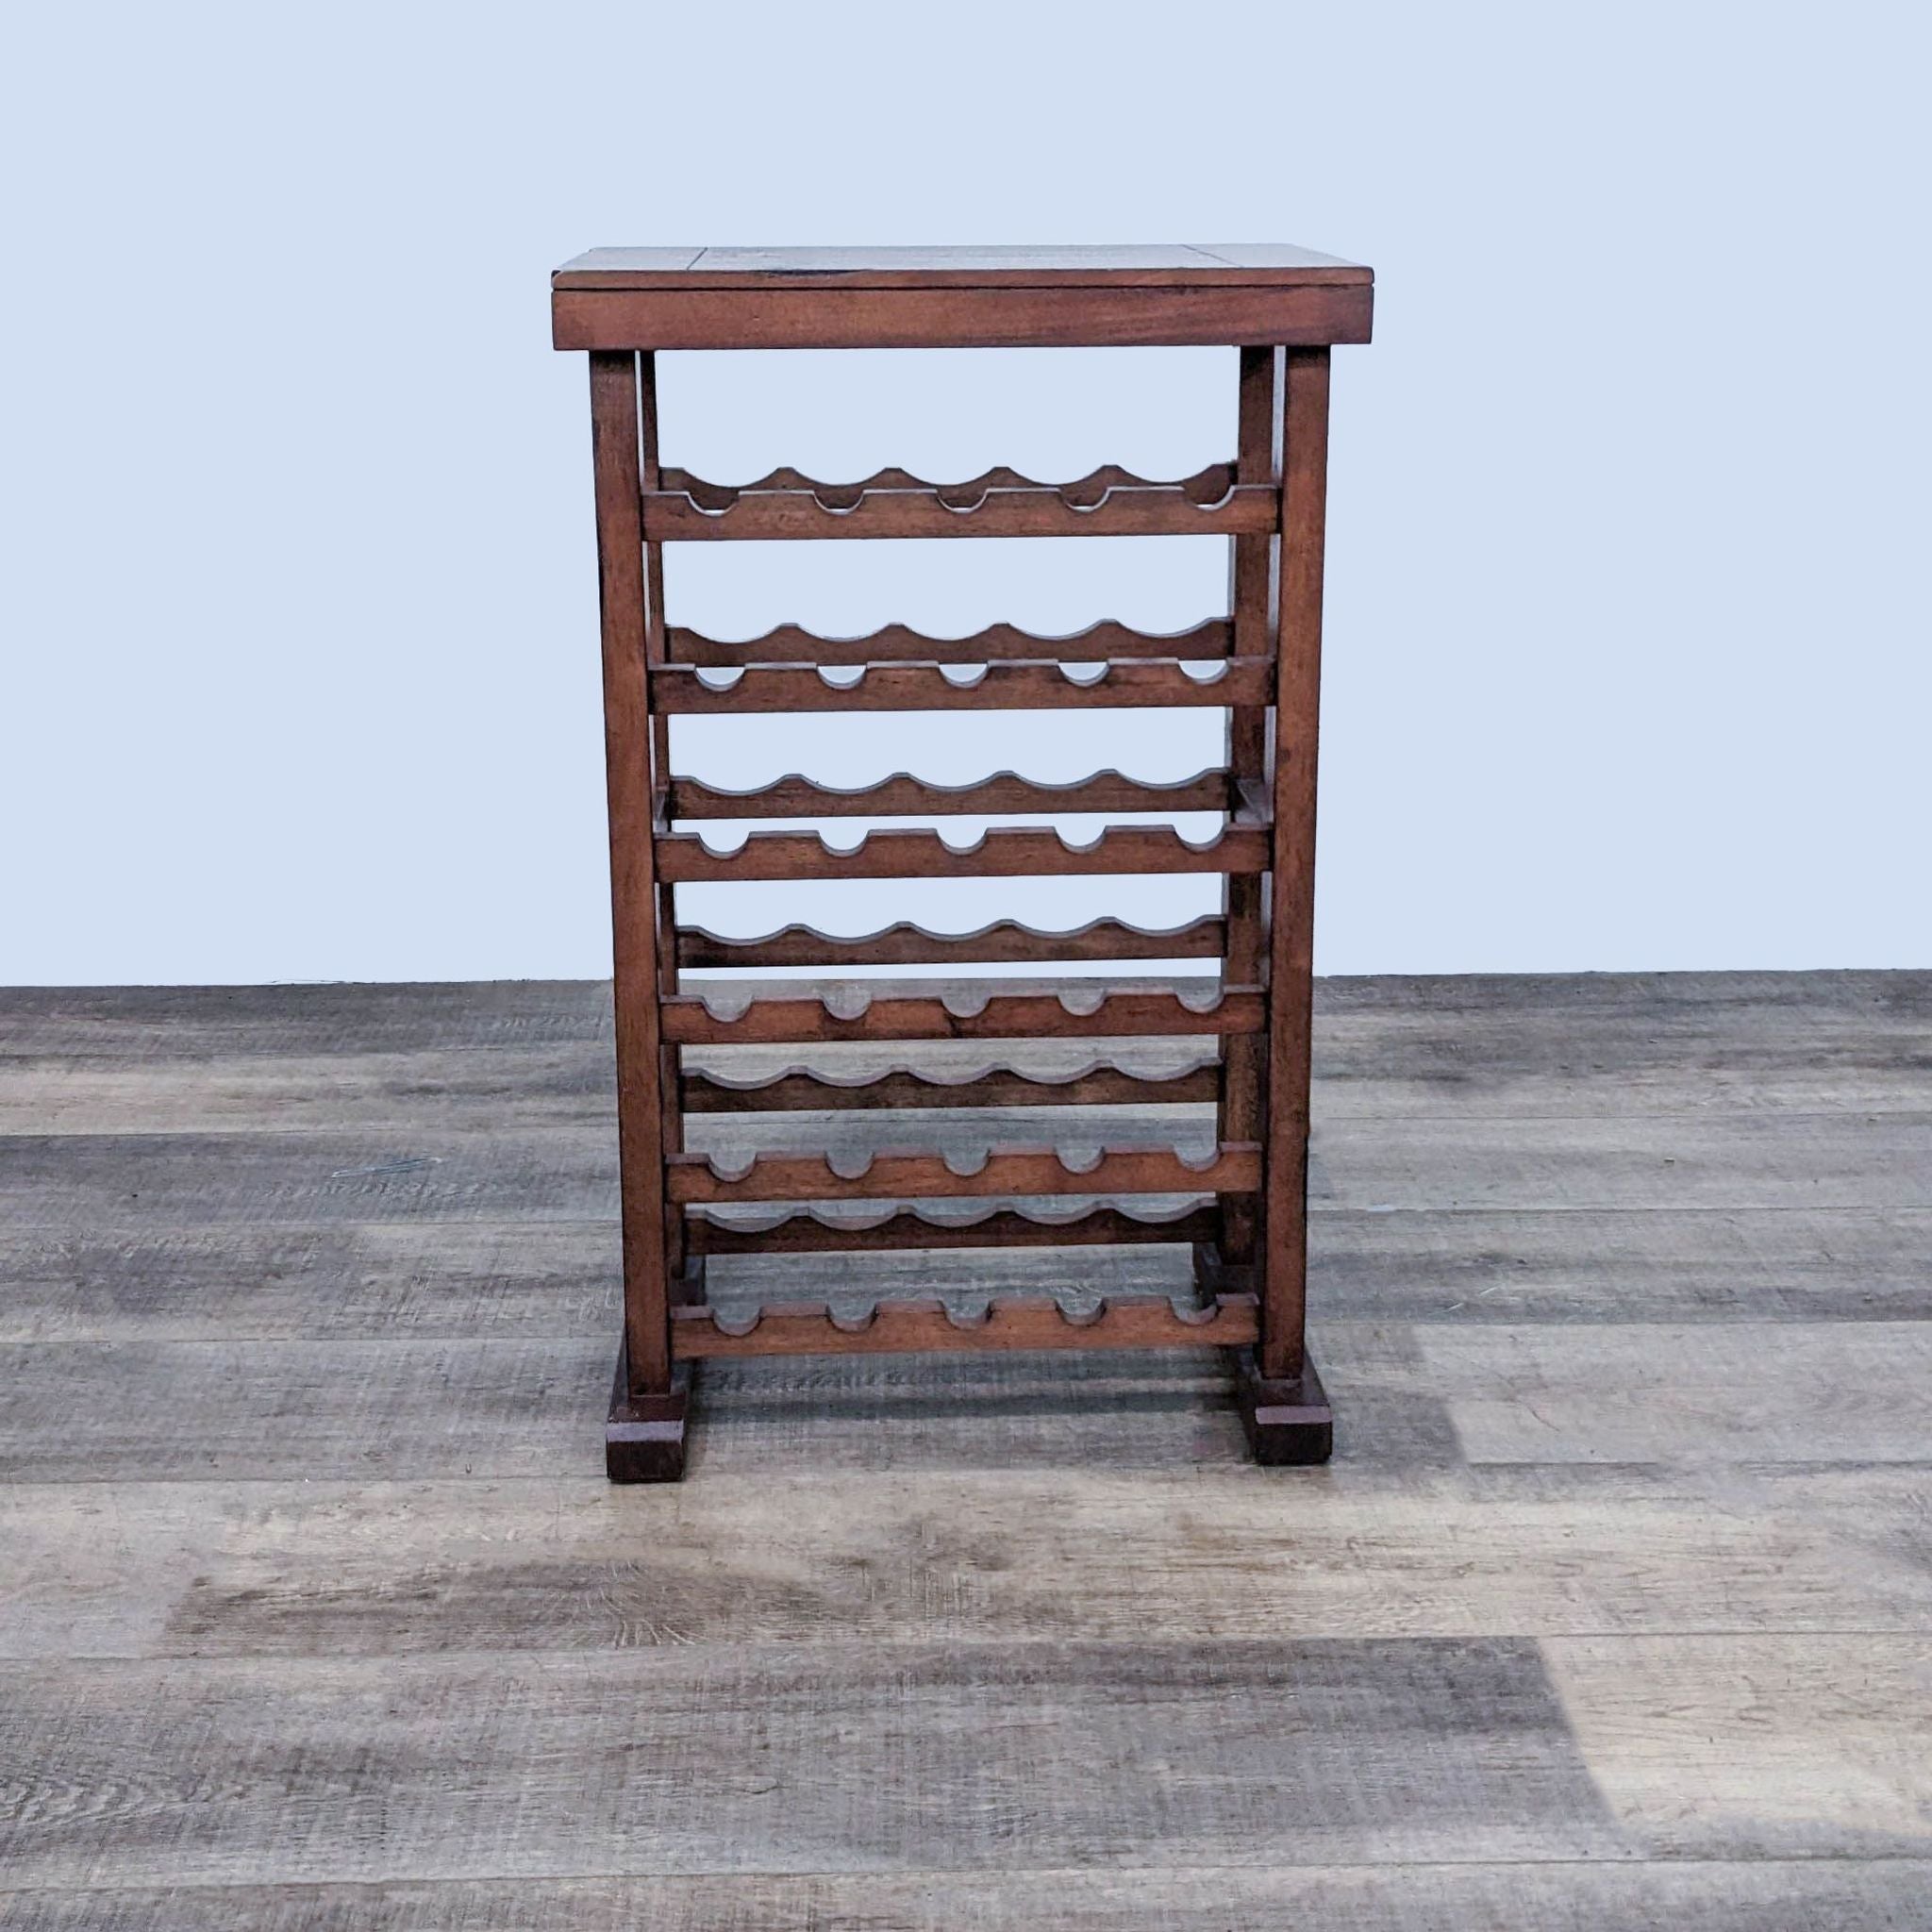 Wooden wine rack by Reperch with multiple scalloped shelves, on gray floor.